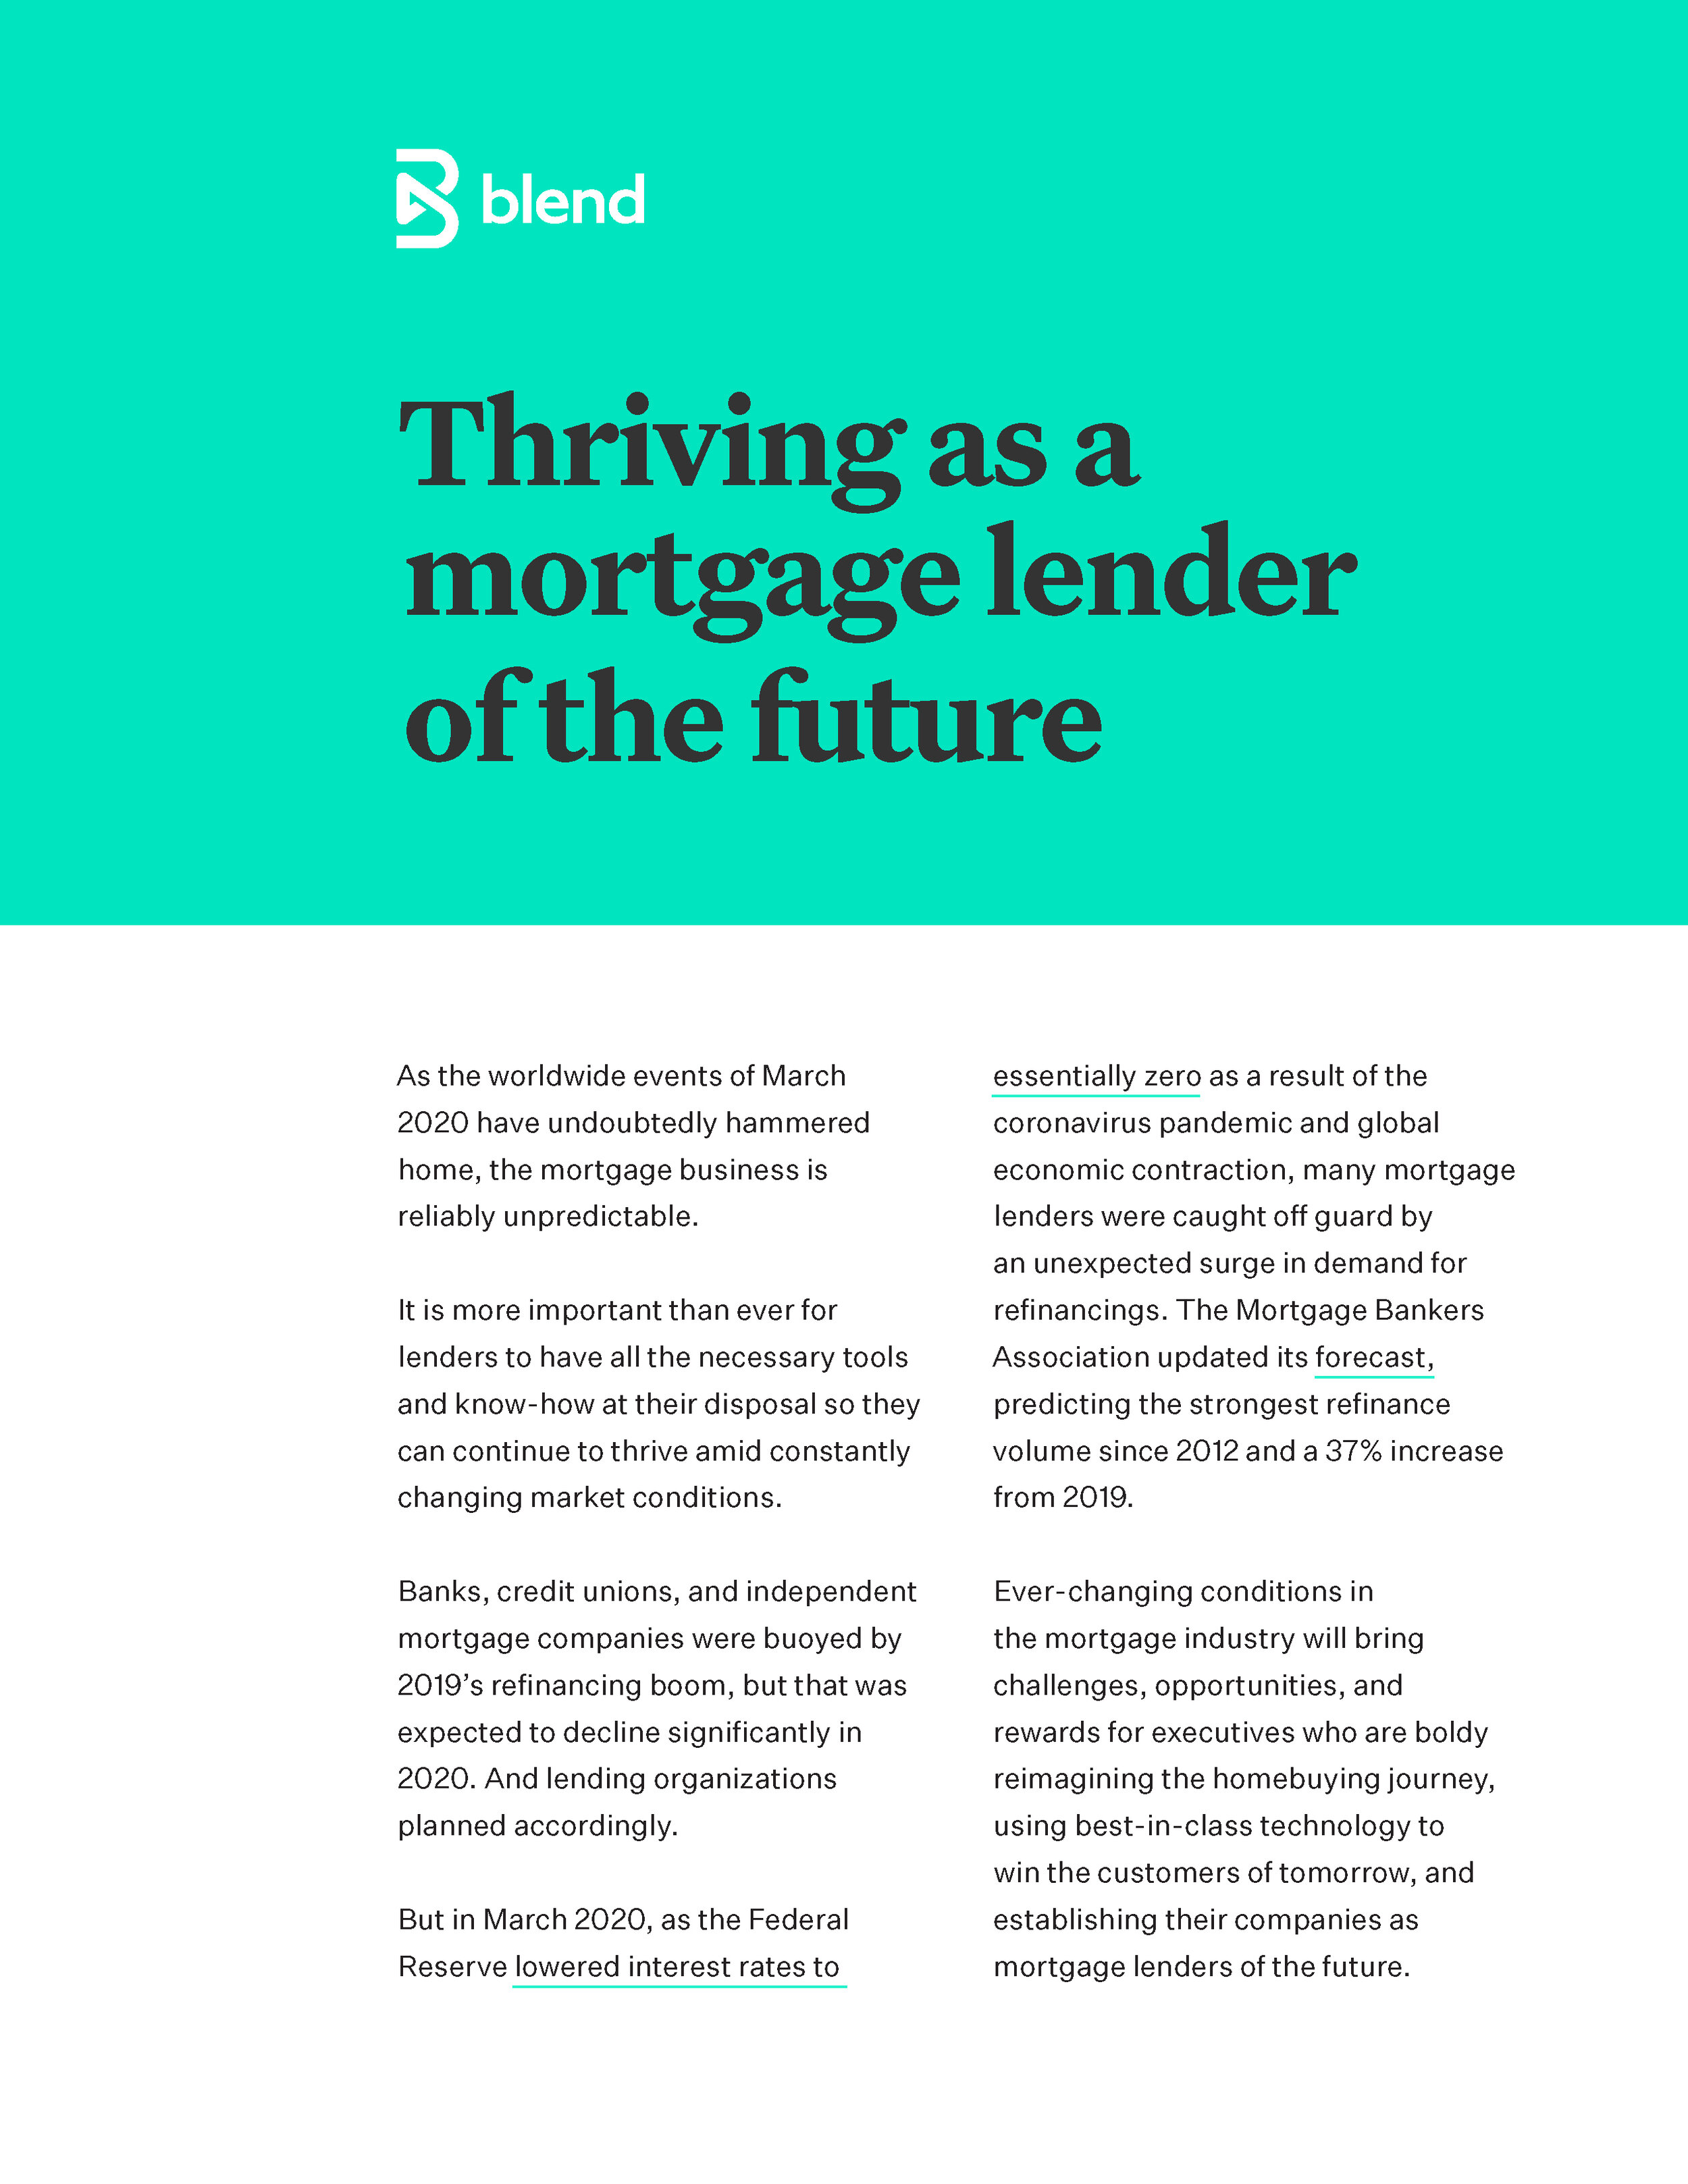 Thriving as a Mortgage Lender of the Future_March Update.jpg